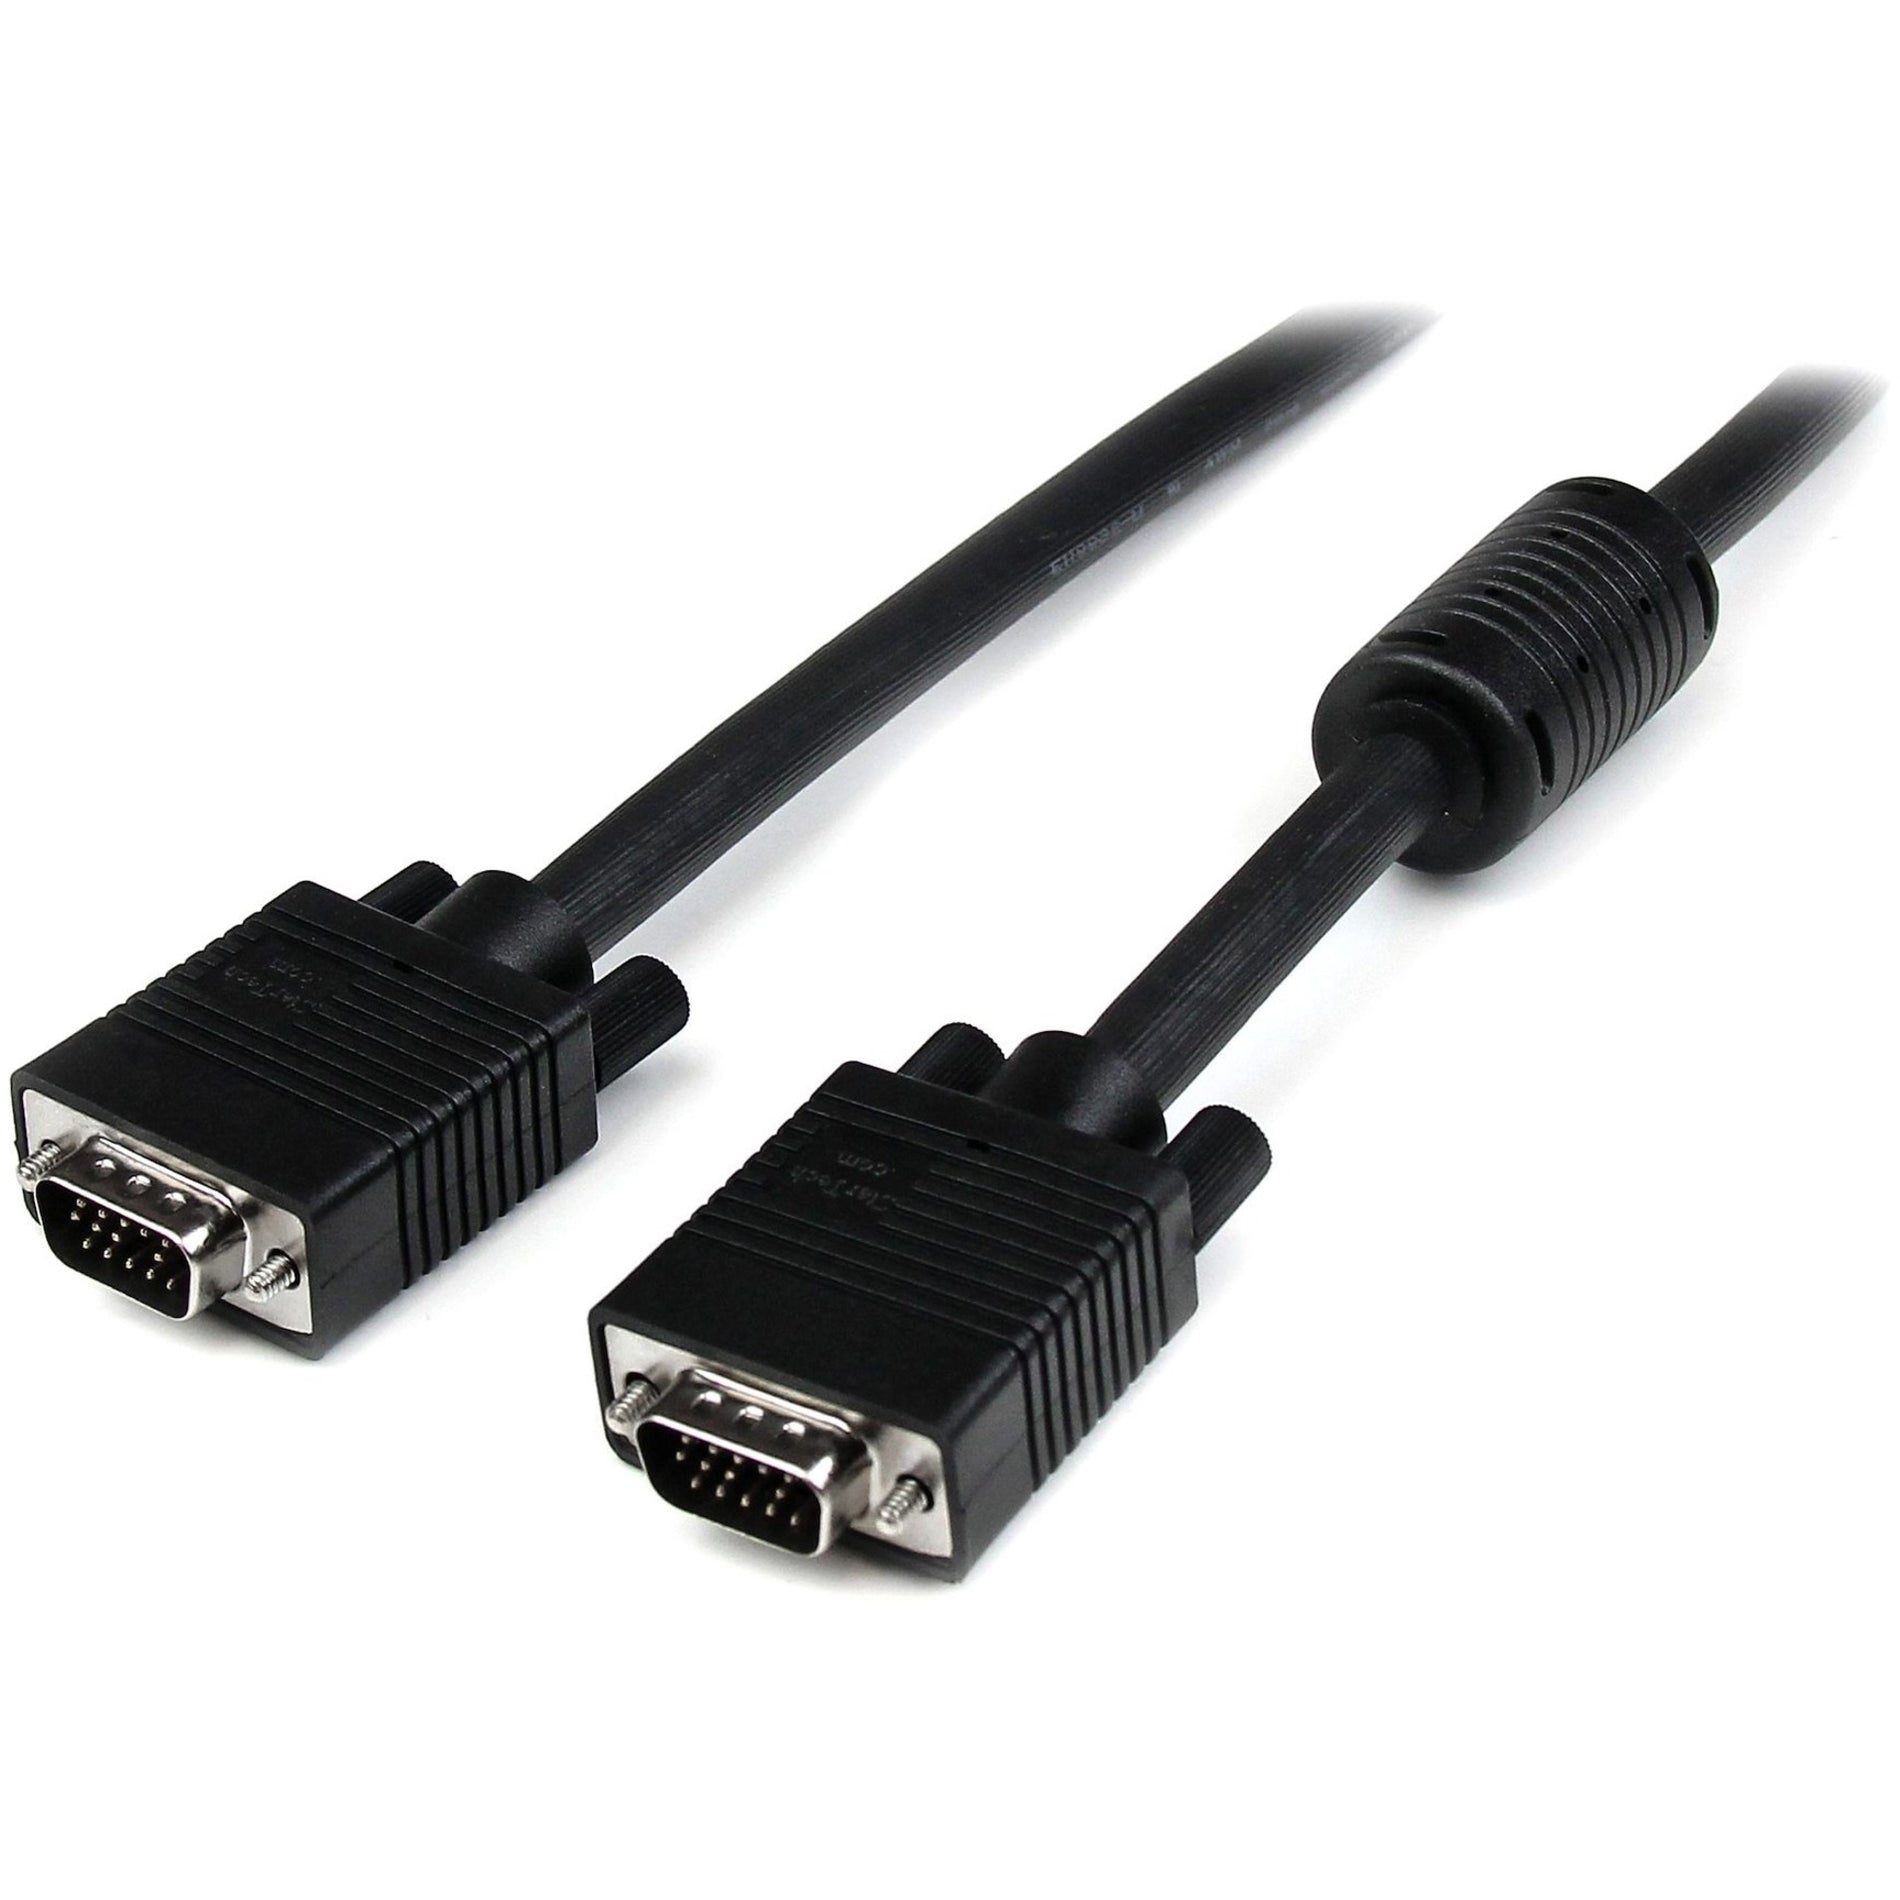 StarTech.com MXT101MMHQ High-Resolution Coaxial SVGA/VGA Monitor Cable, Crystal Clear Display, 6 ft